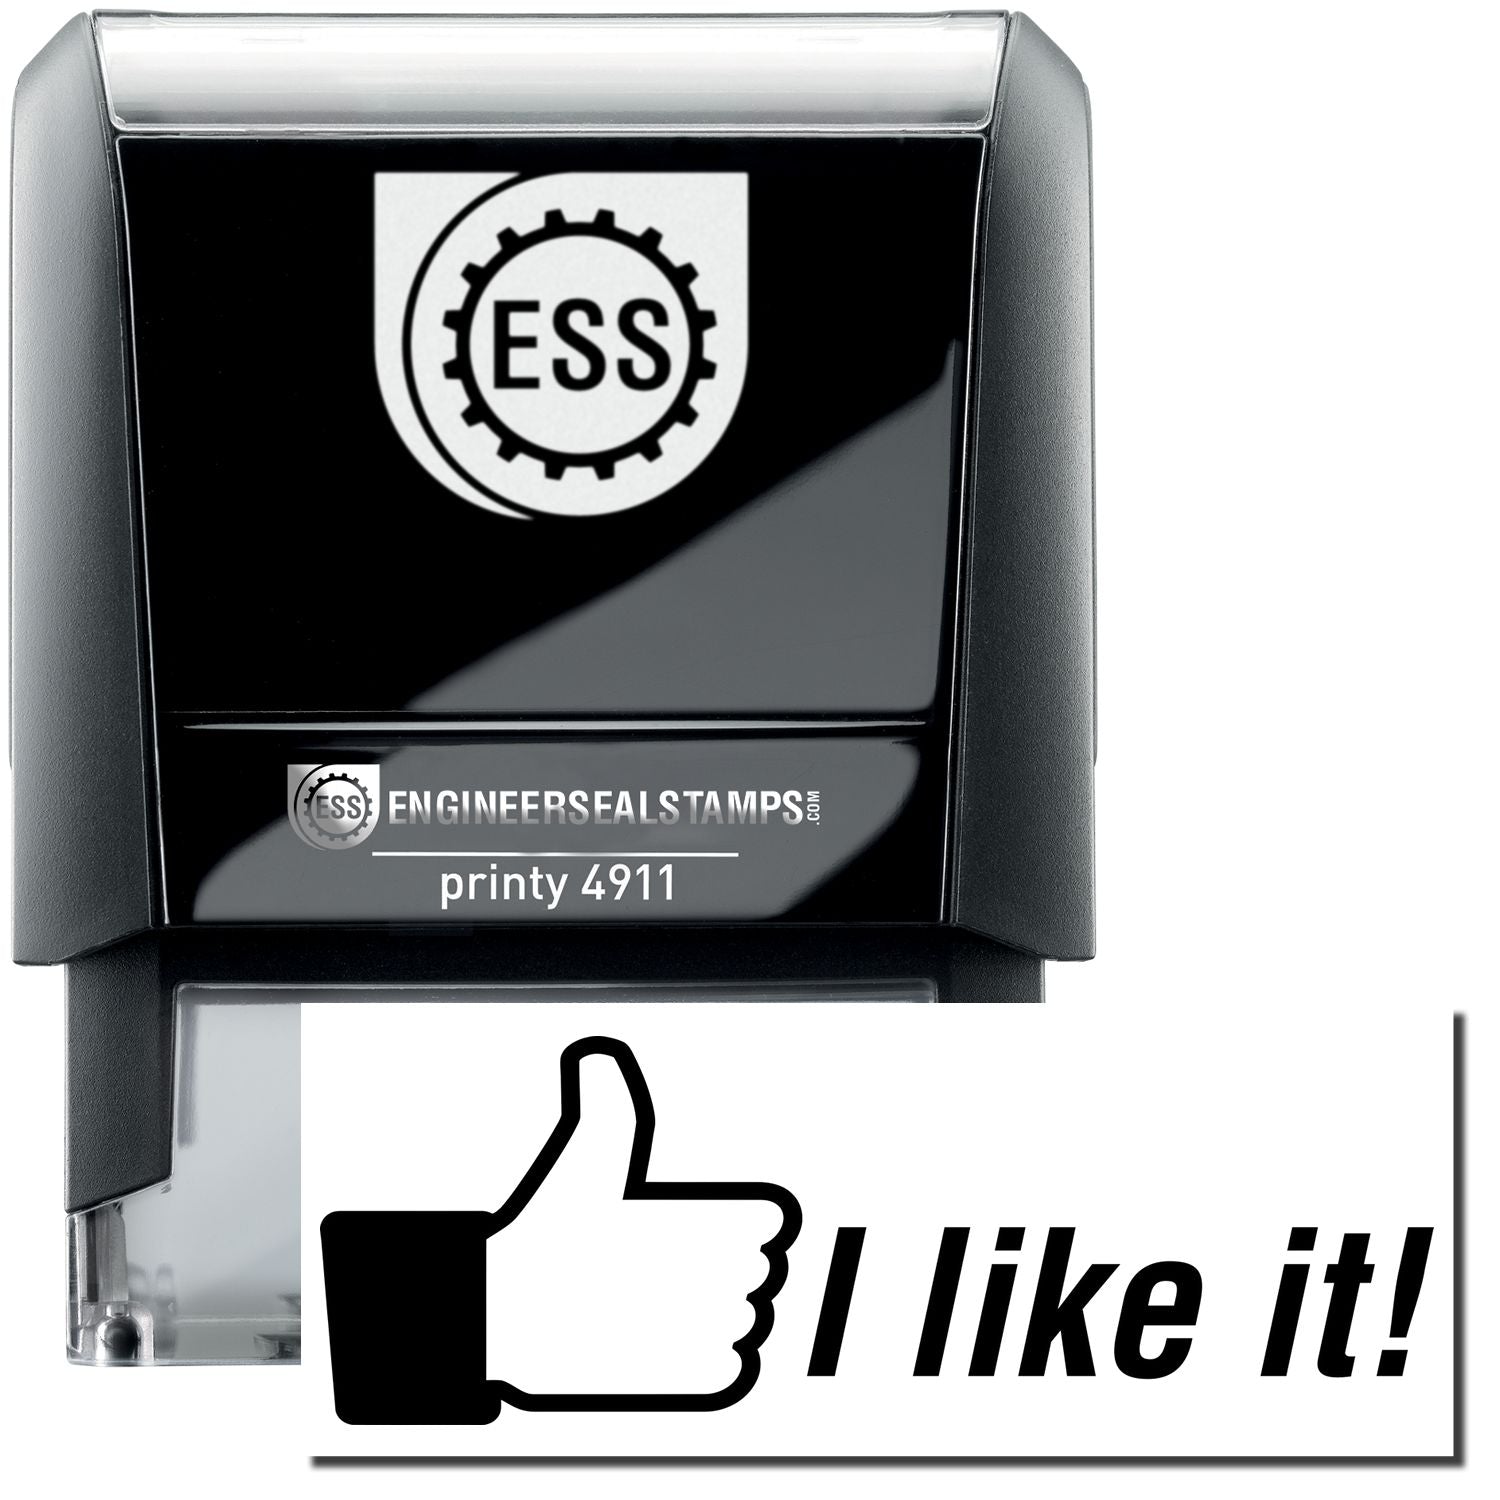 A self-inking stamp with a stamped image showing how the text "I like it!" (with a thumbs-up icon on the left) is displayed after stamping.